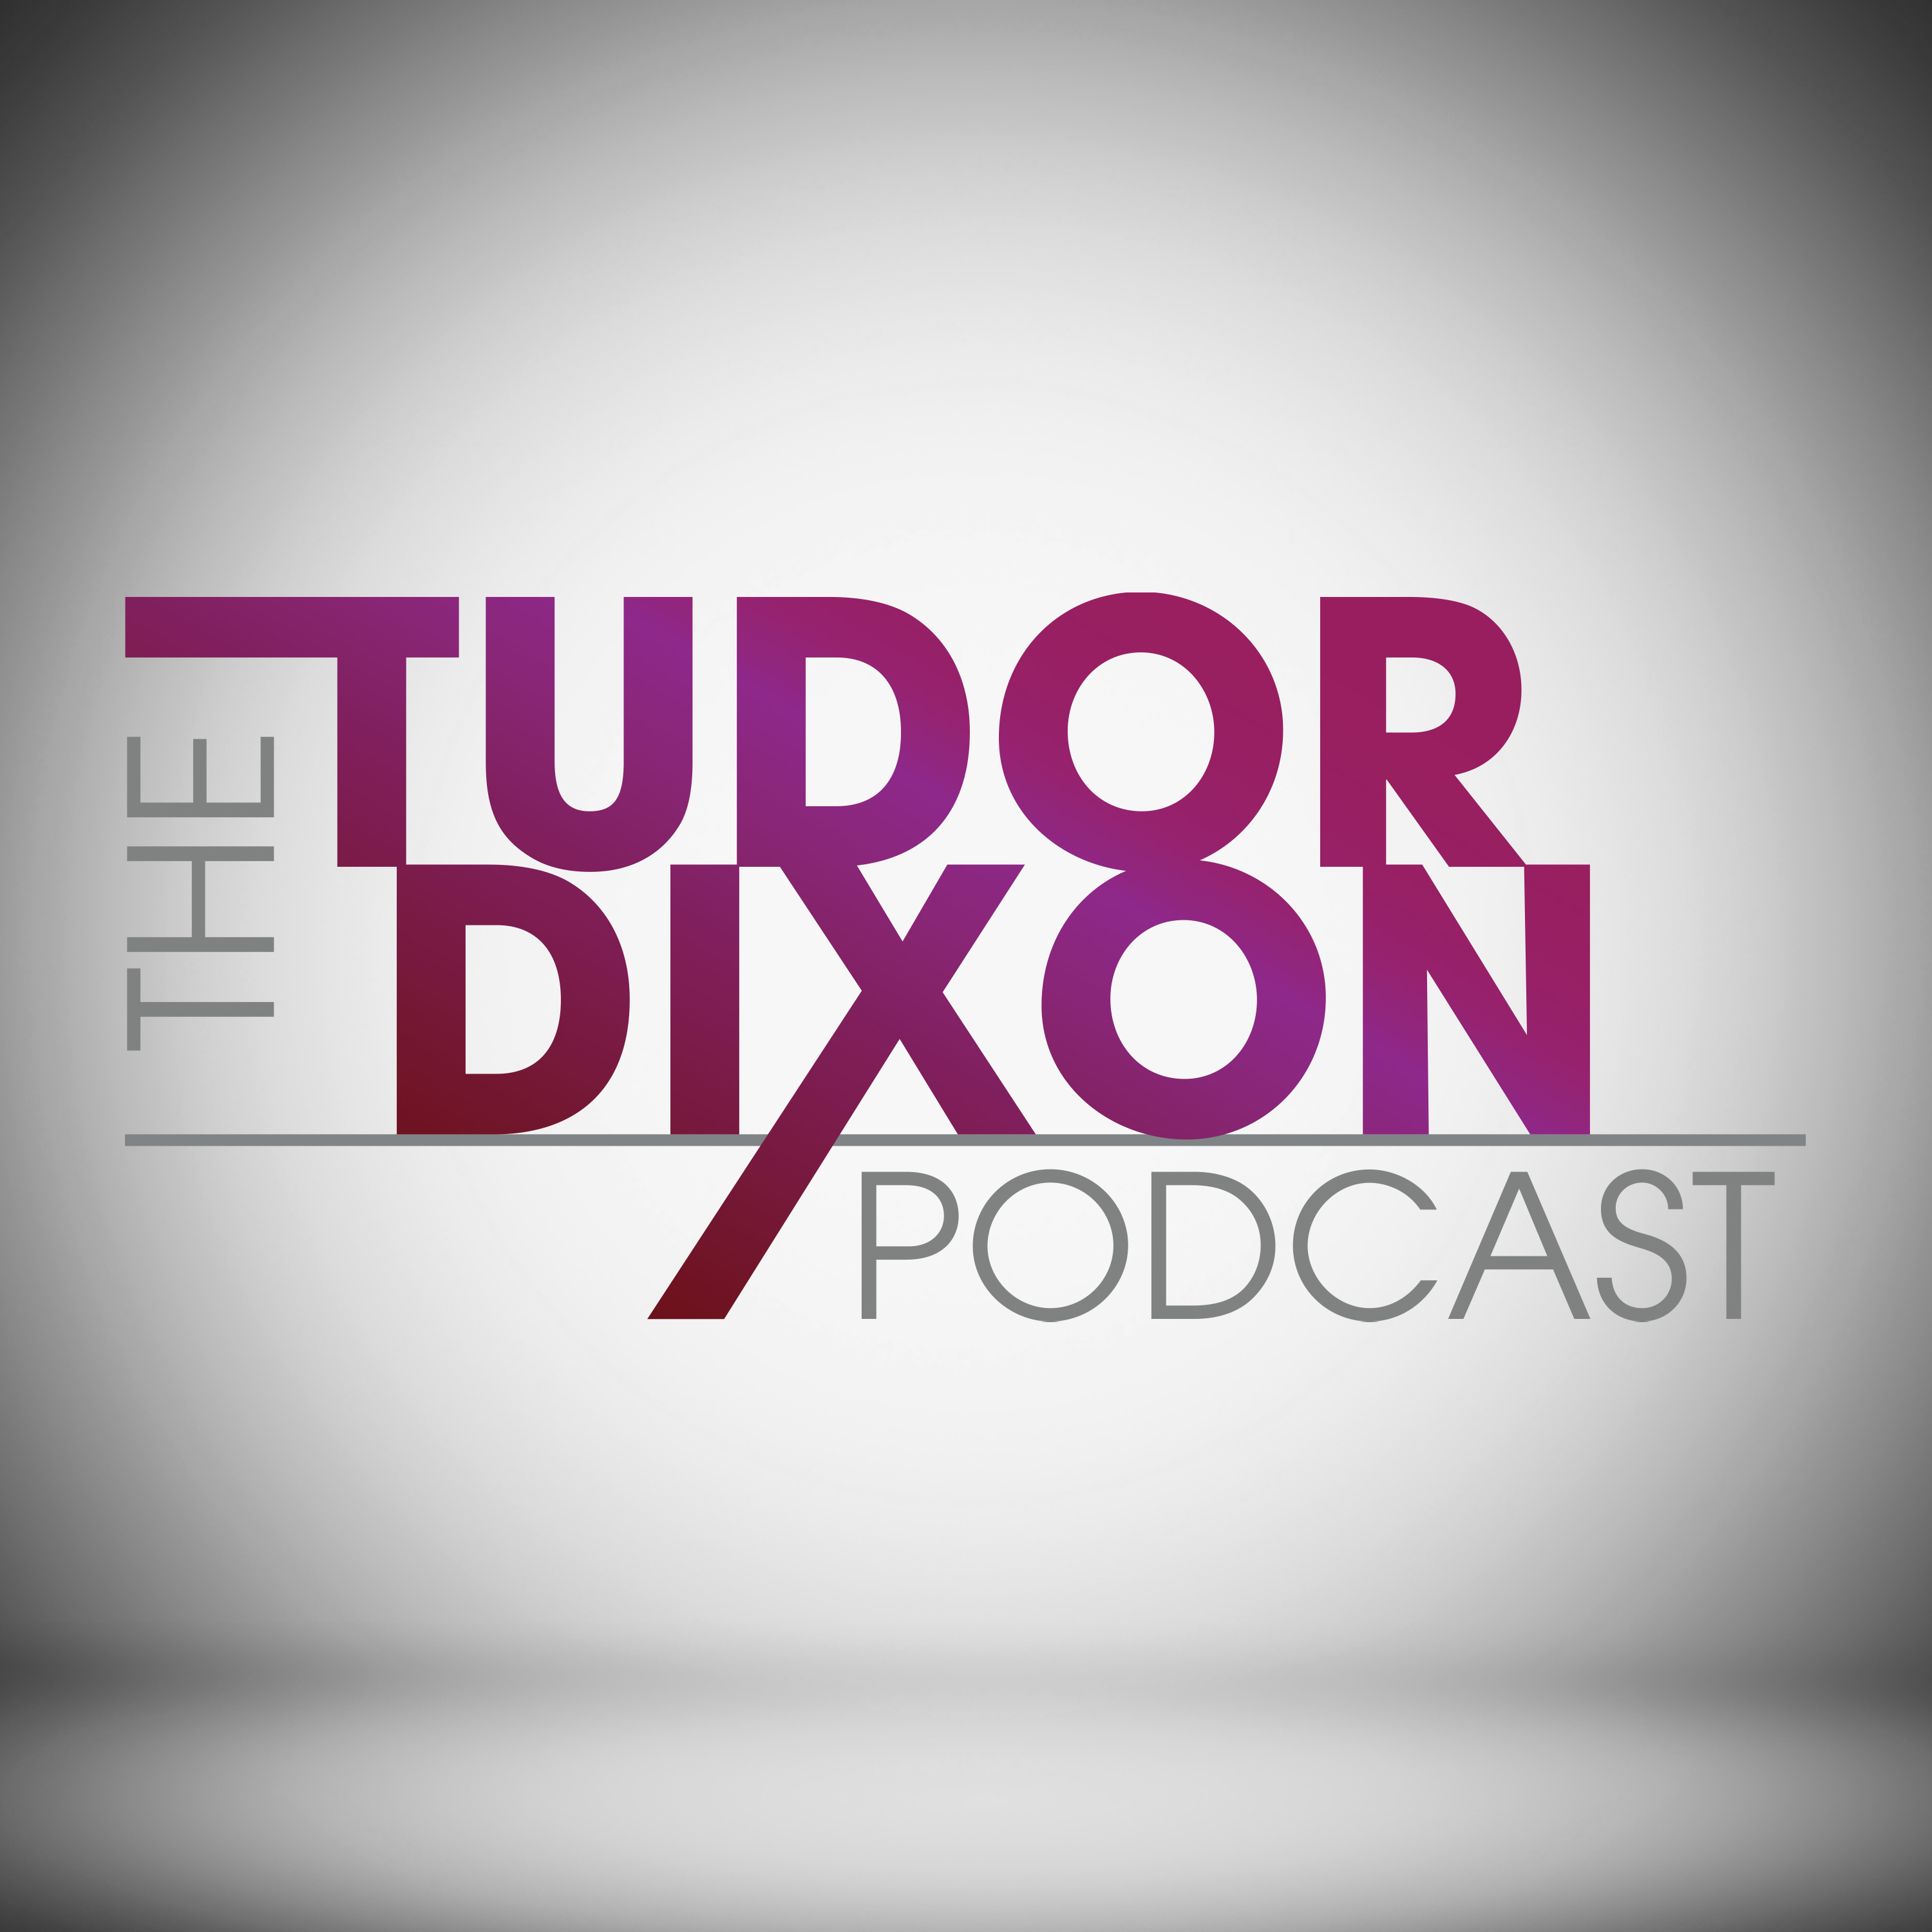 The Tudor Dixon Podcast: Family Values with Mike Pence & Charlotte Pence Bond